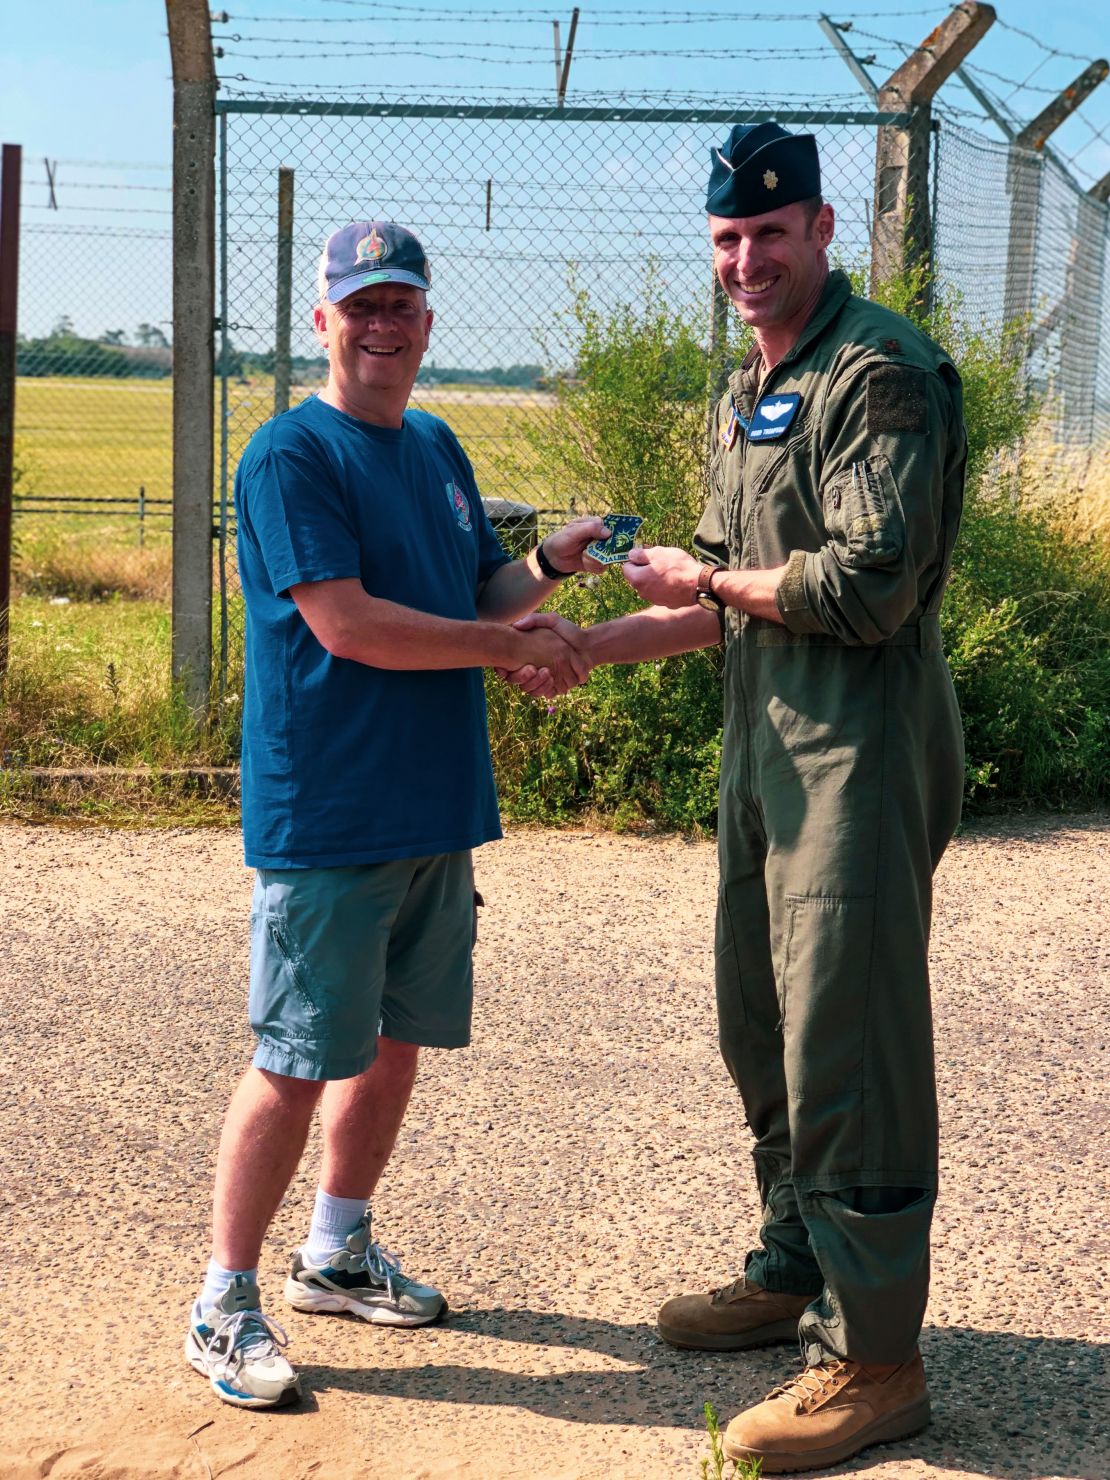 Photographer Ian Simpson meets fighter pilot Maj. Grant Thompson on July 20, 2021 after Simpson made a potentially lifesaving intervention when he spotted something wrong with Thompson's F-15E Strike Eagle fighter jet.